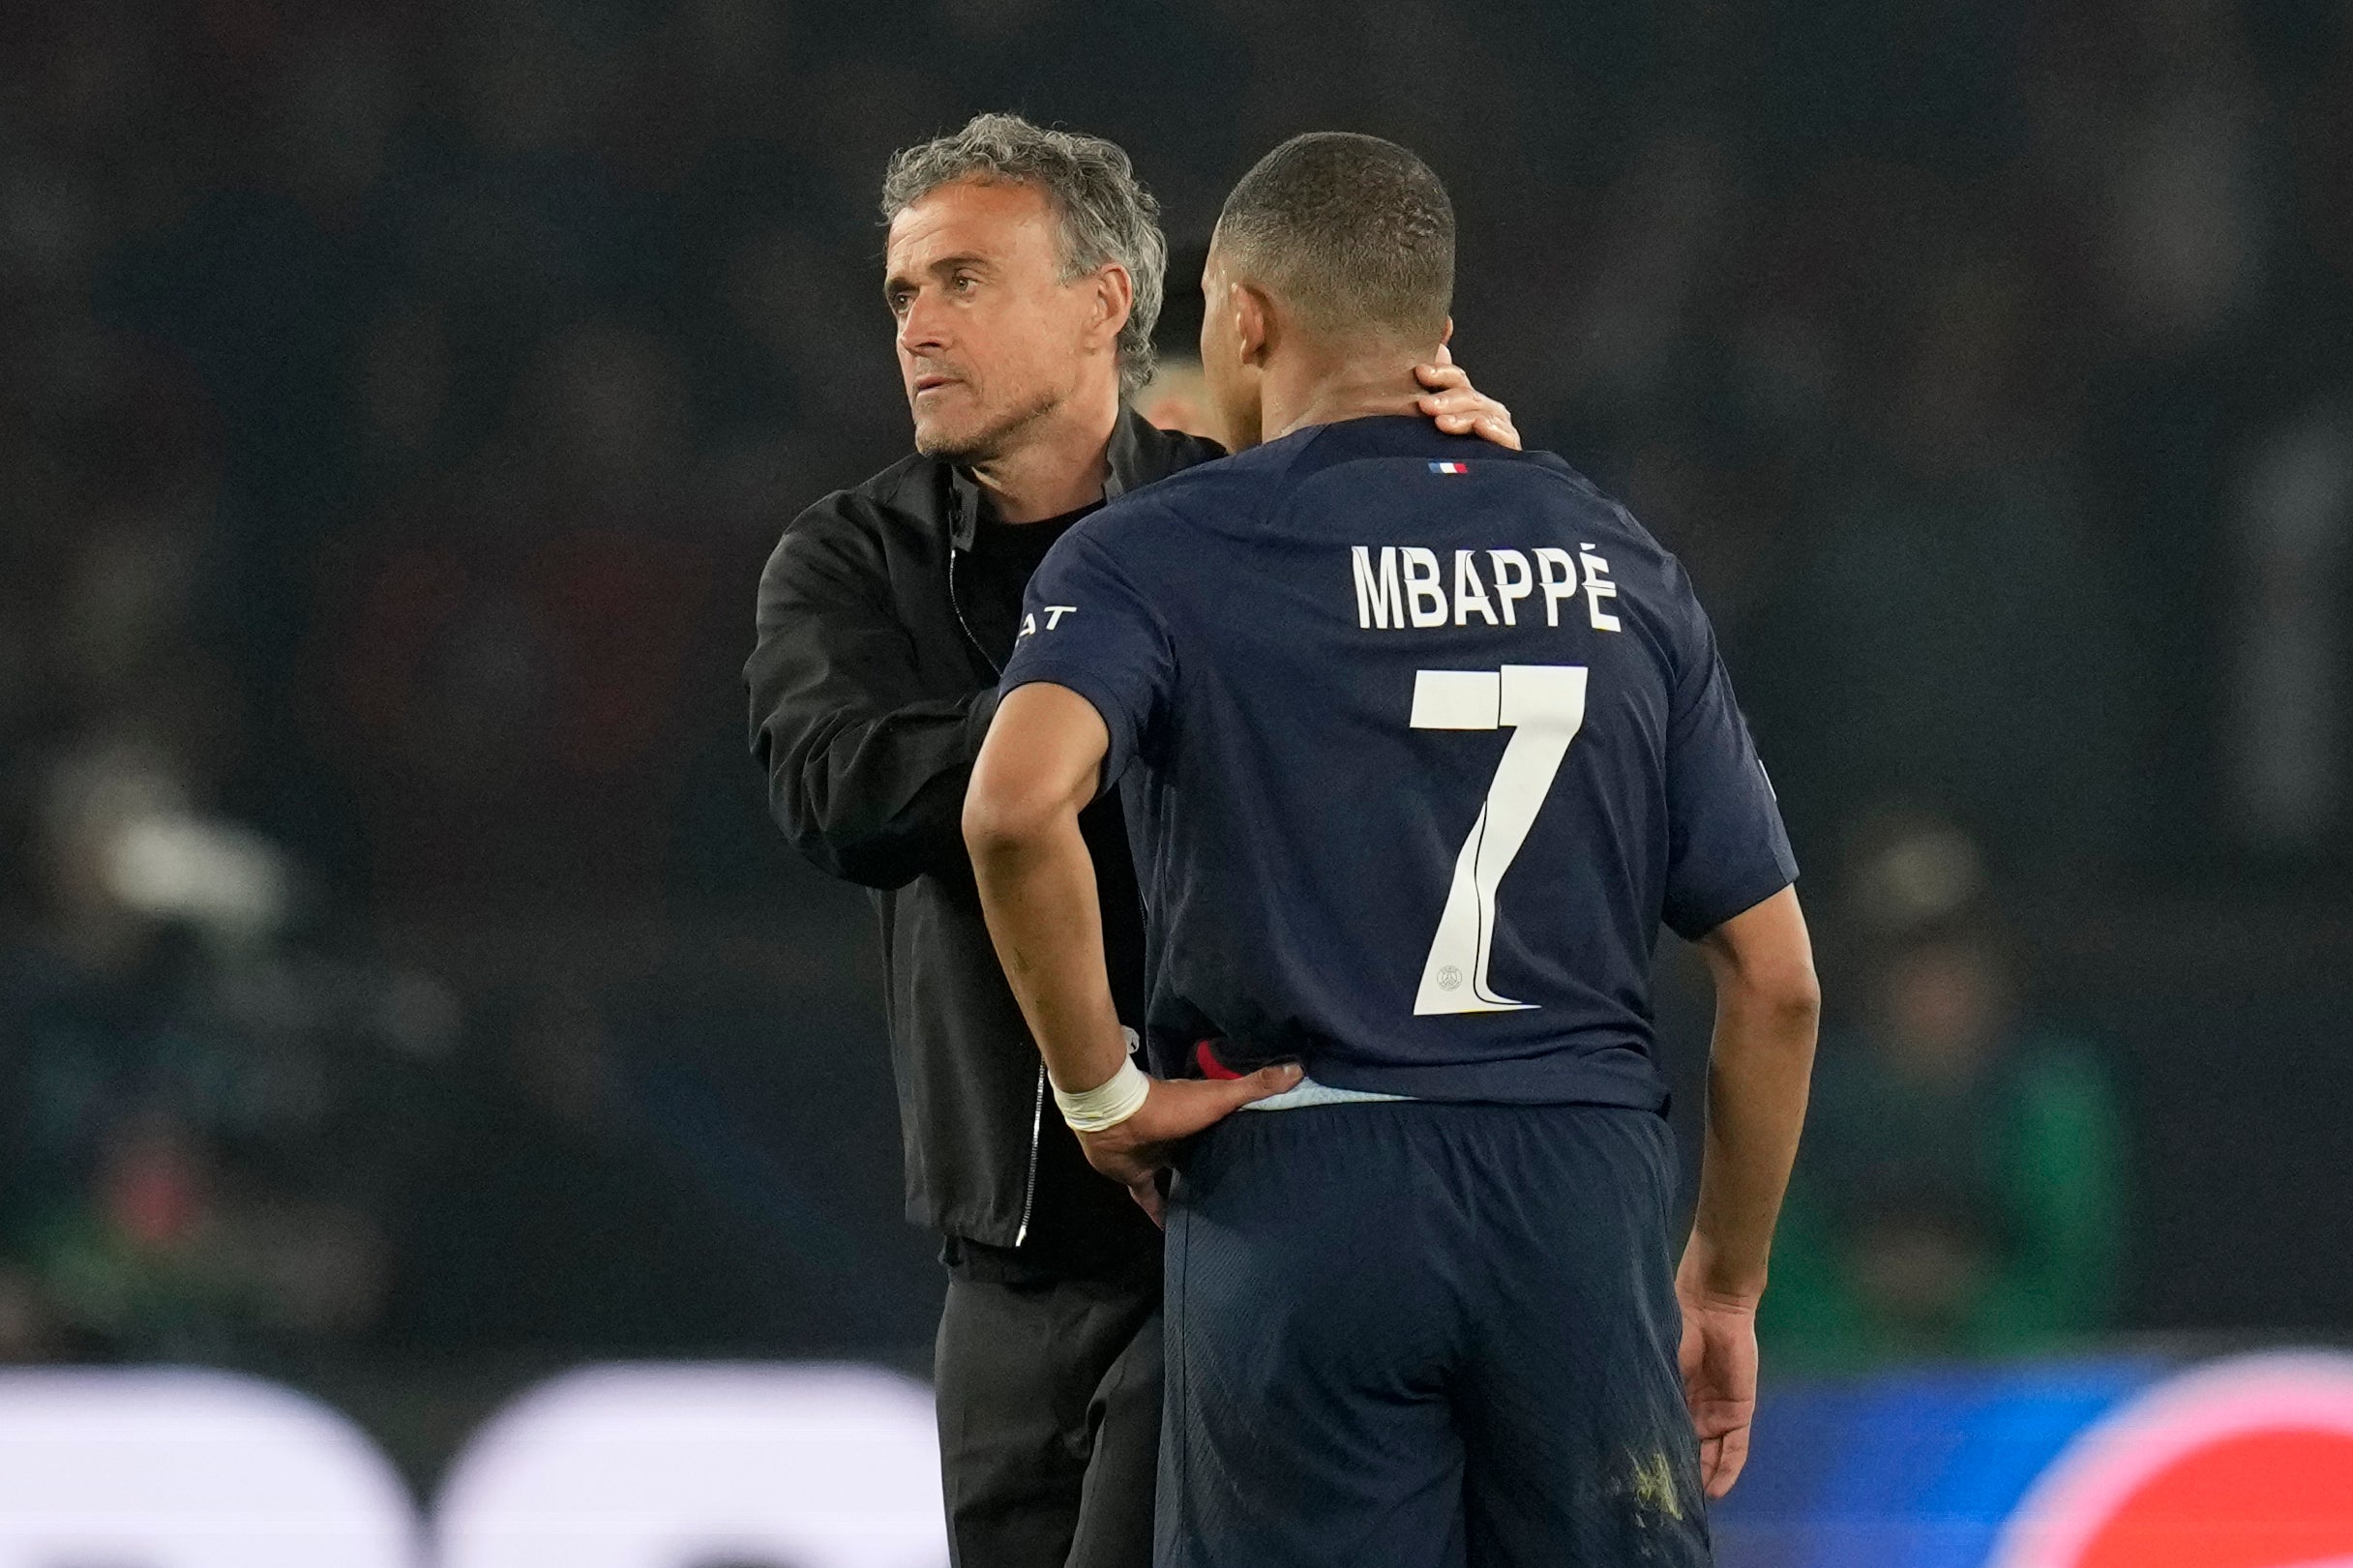 kylian mbappe ends psg era in most fitting way – another champions league failure